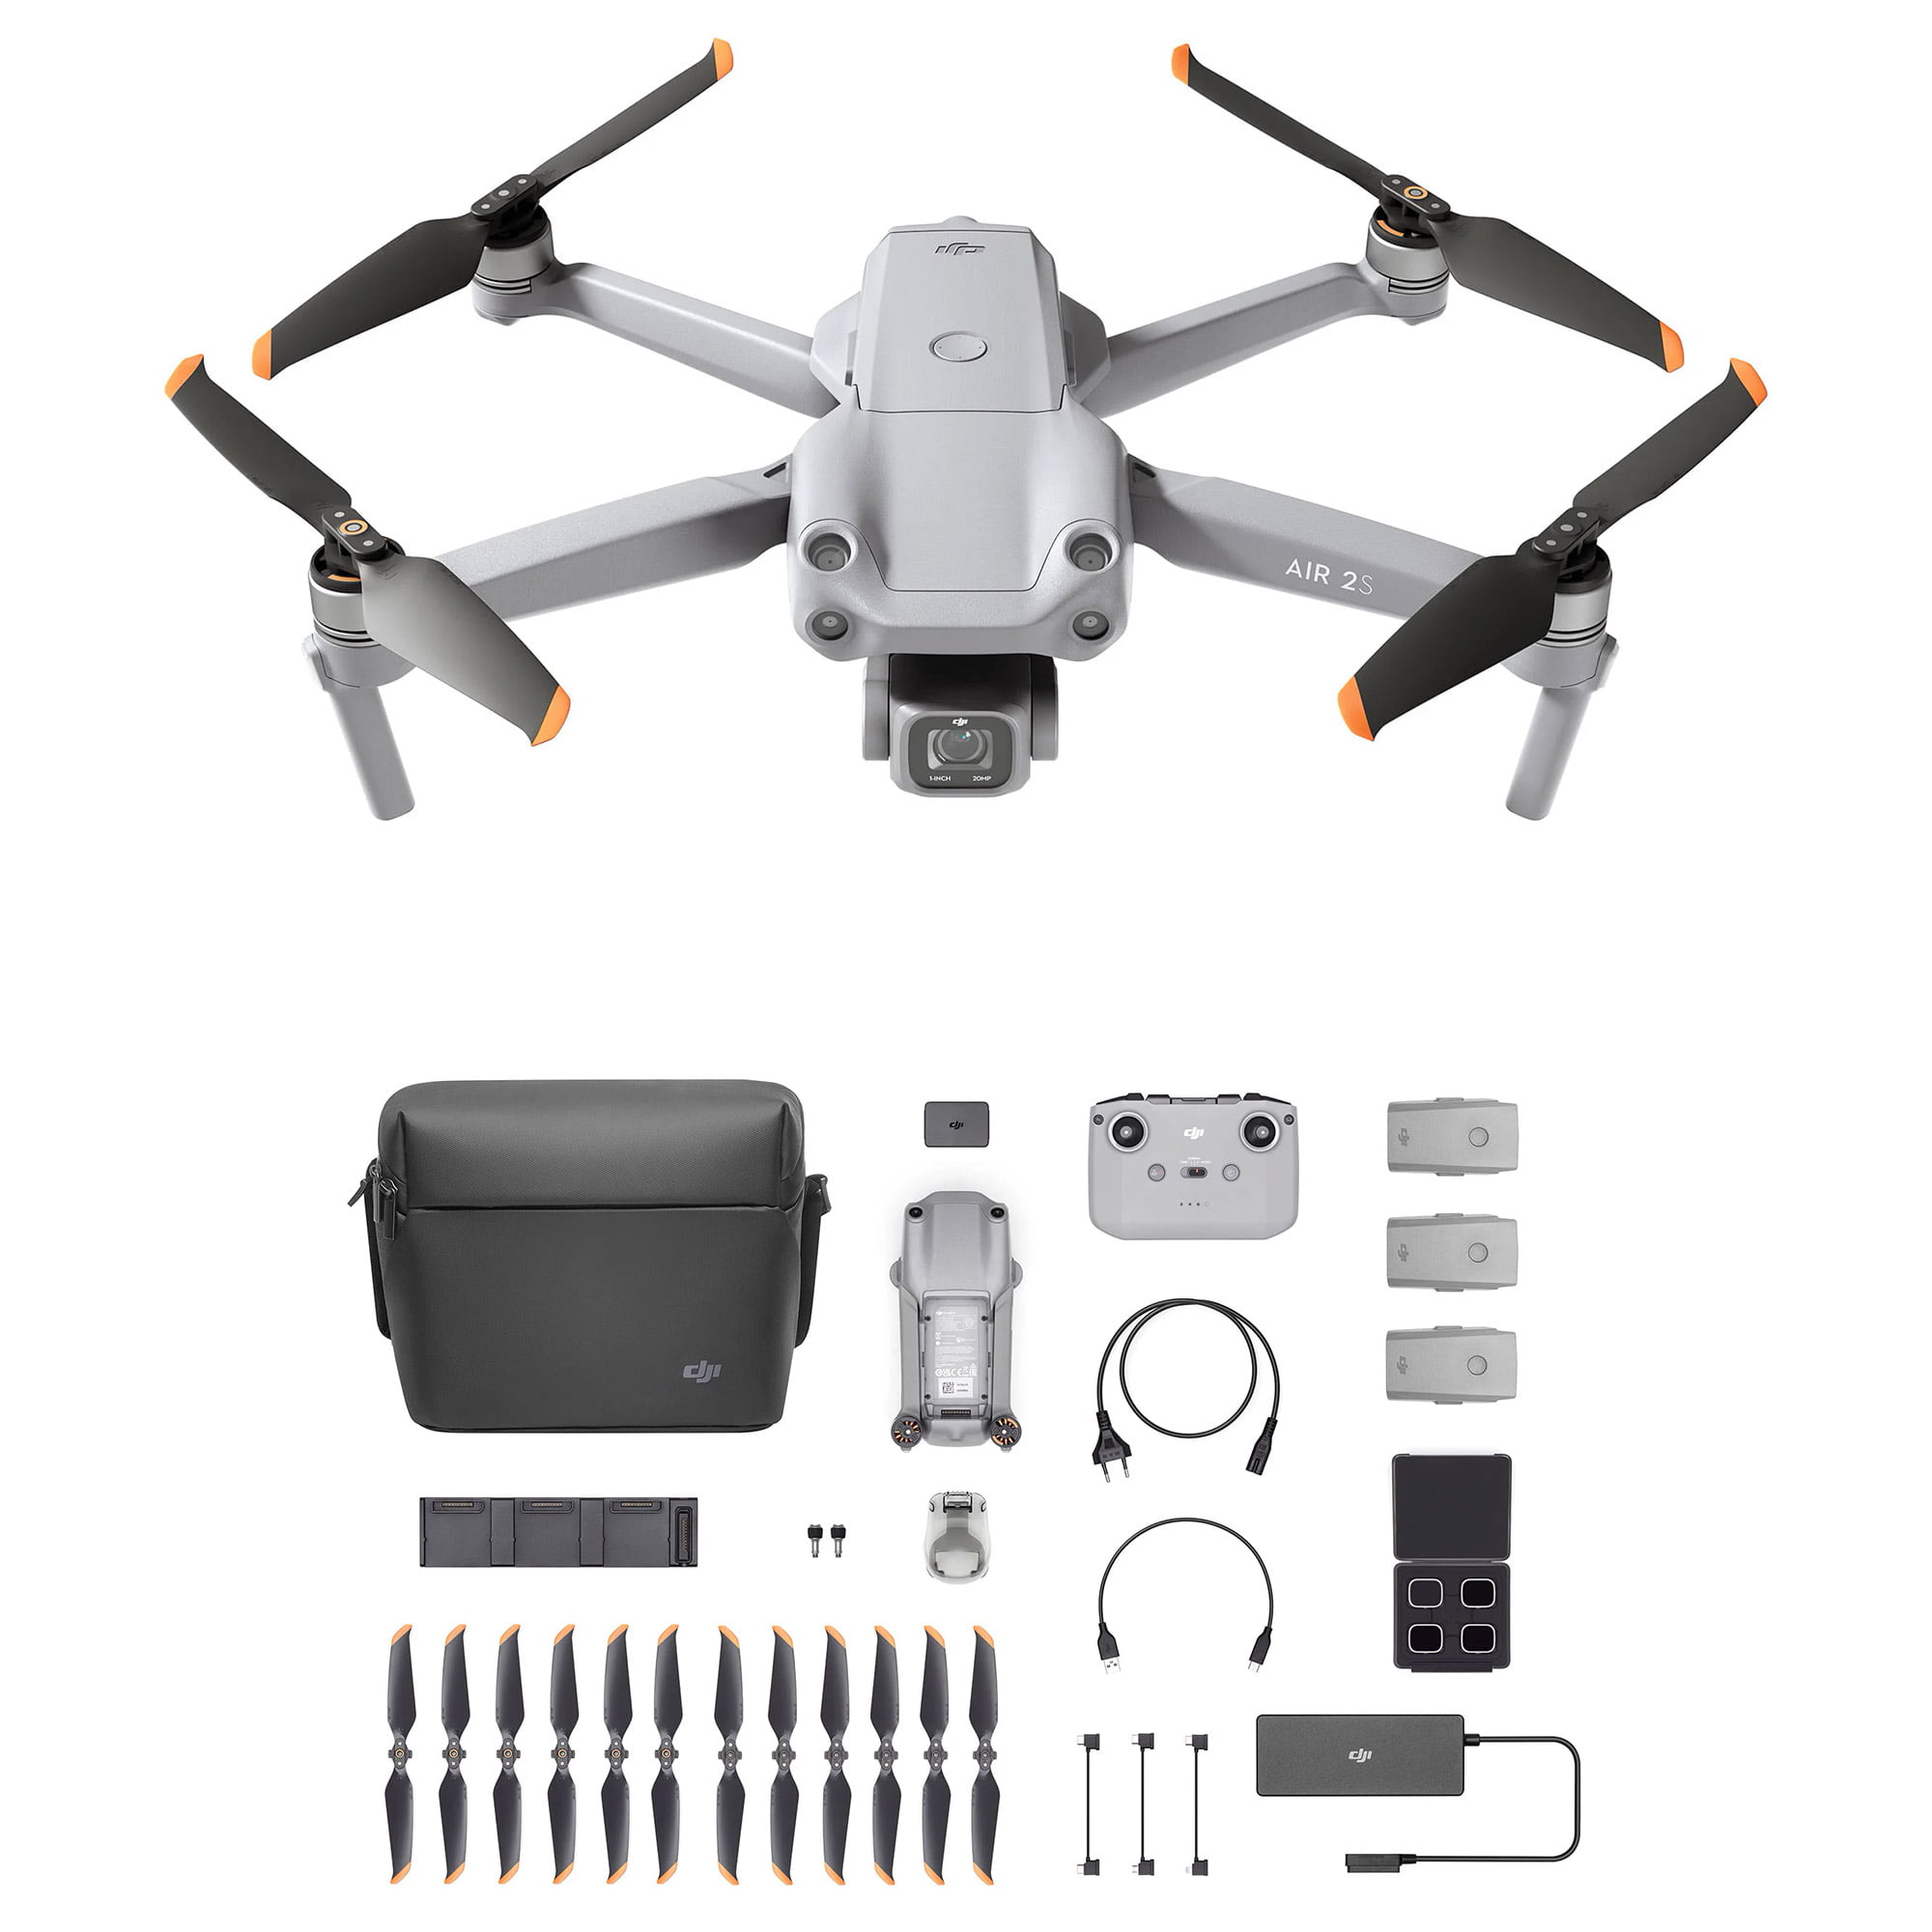 DJI Air 2s Fly more Combo.